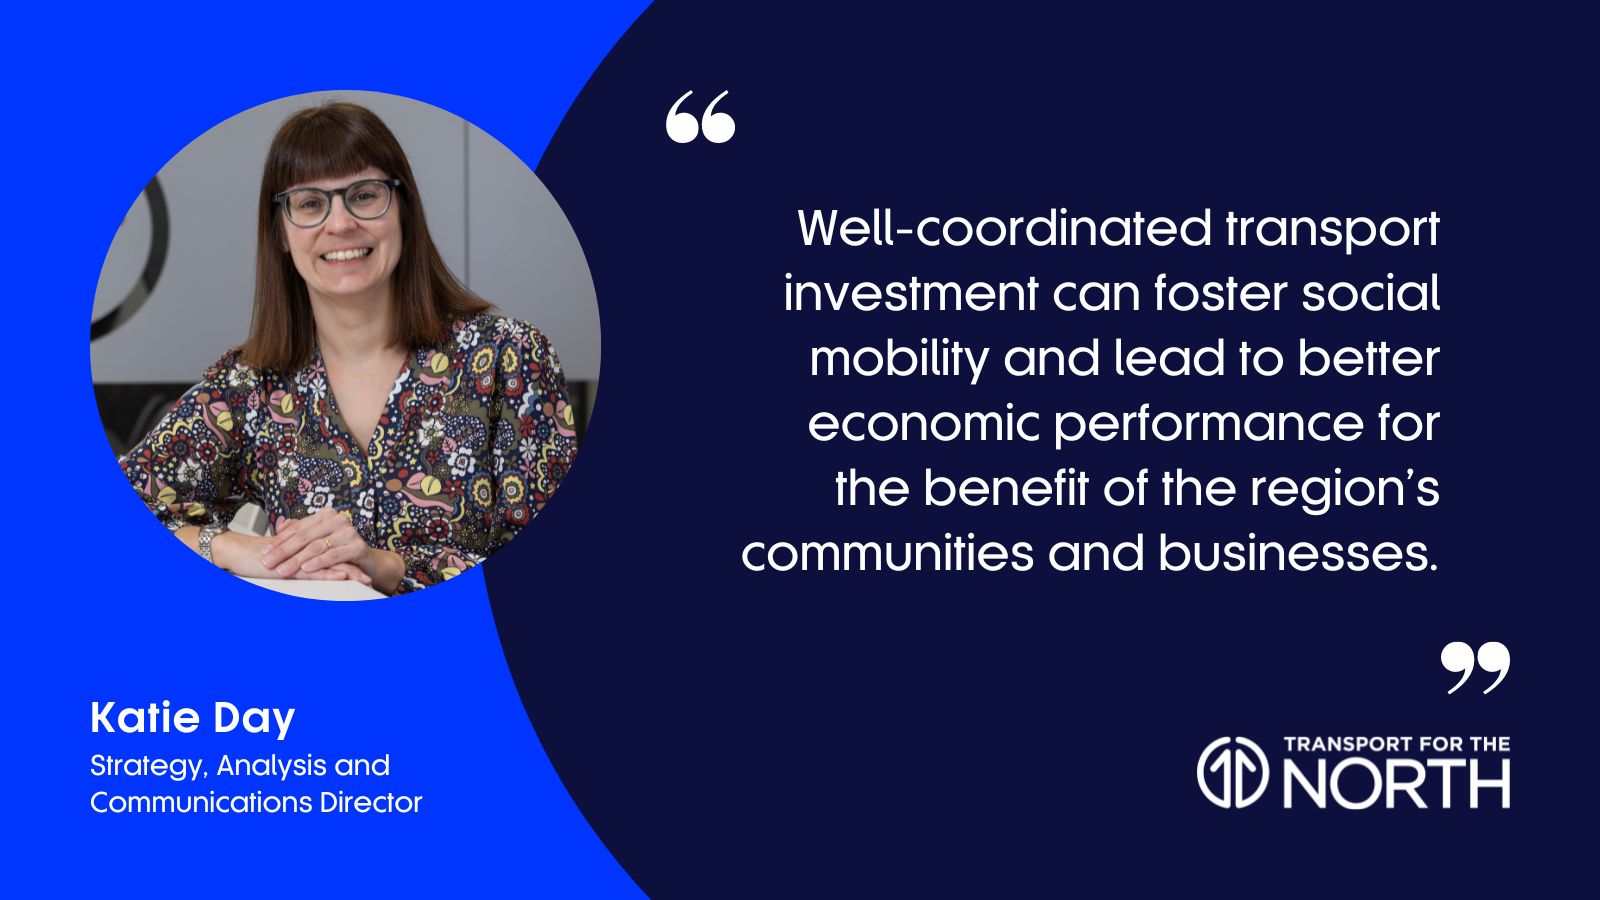 Katie Day on the benefits of well-coordinated transport investment